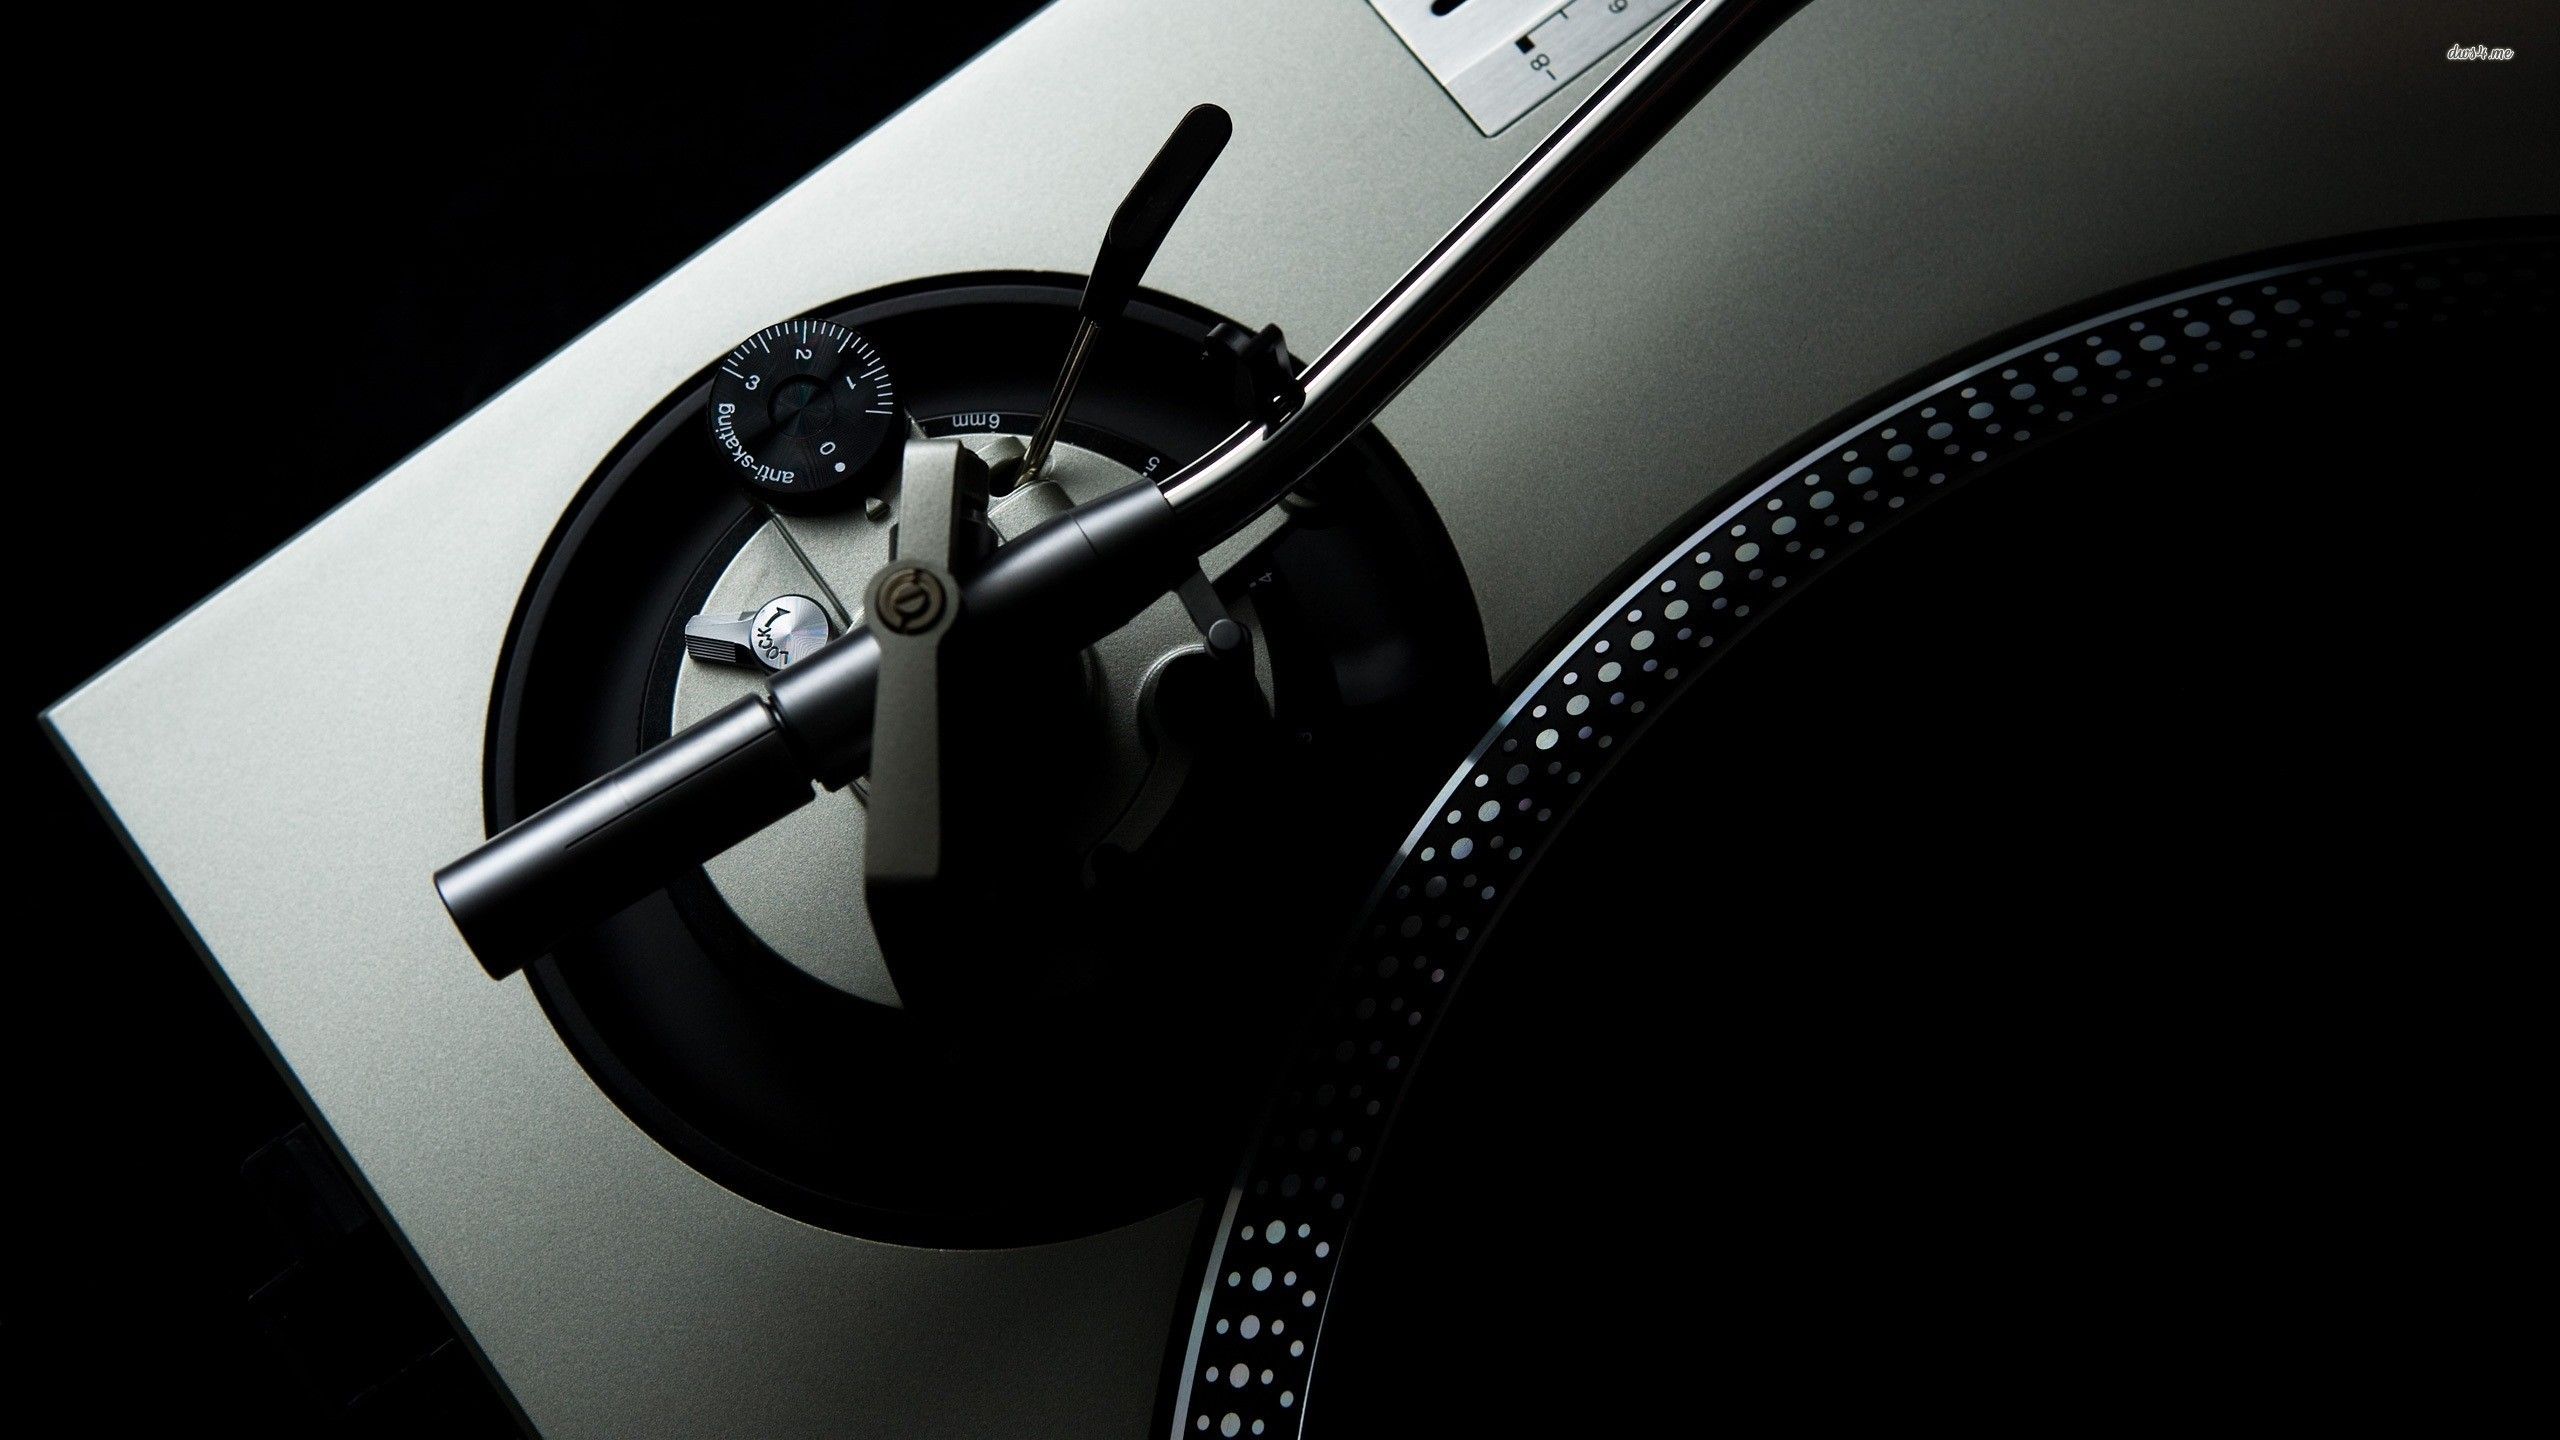 Turntable wallpaper - Music wallpapers -